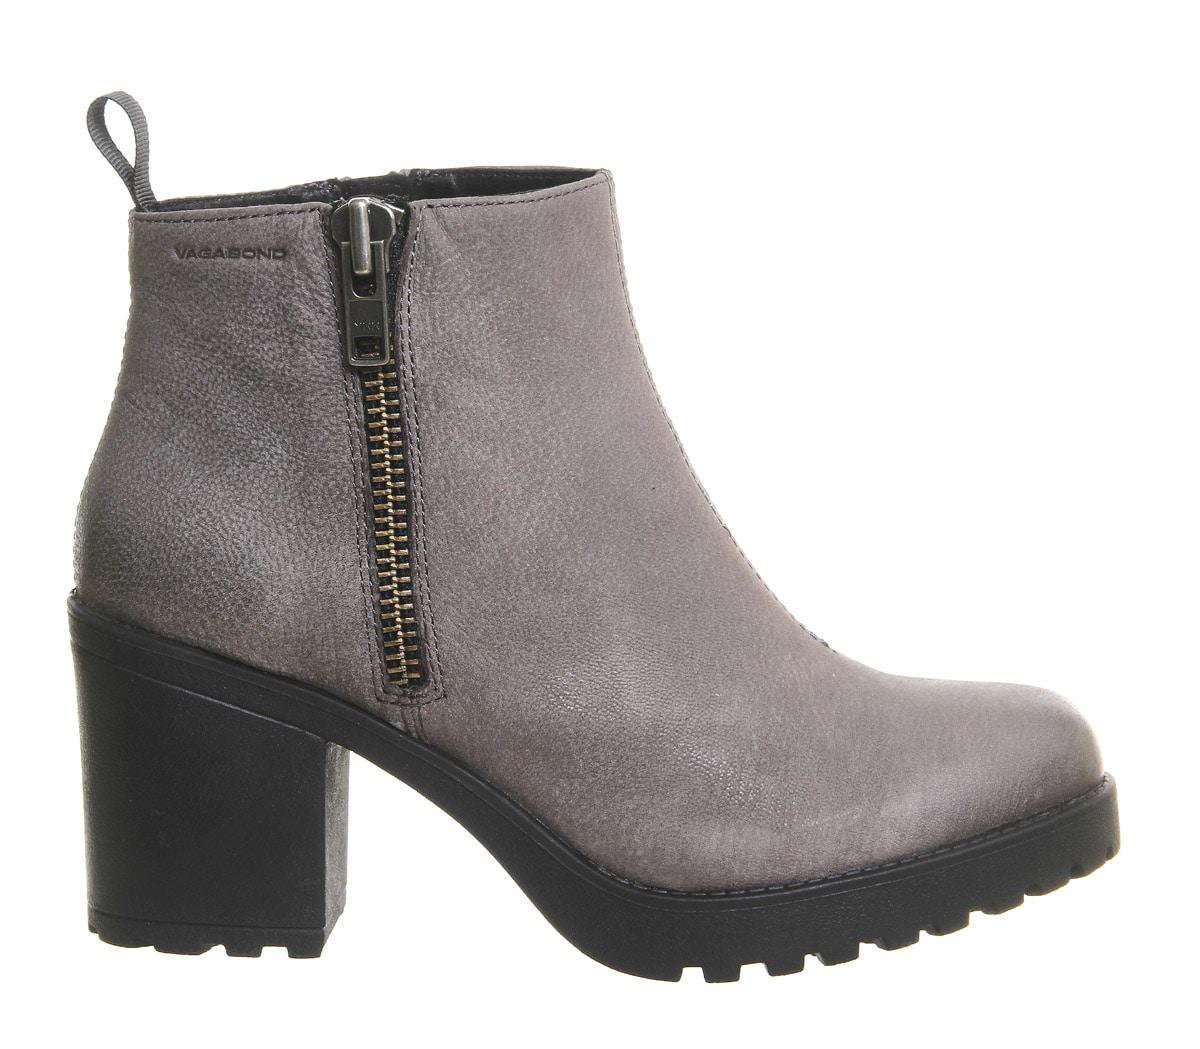 Vagabond Leather Grace Side Zip Boot in Gray - Lyst